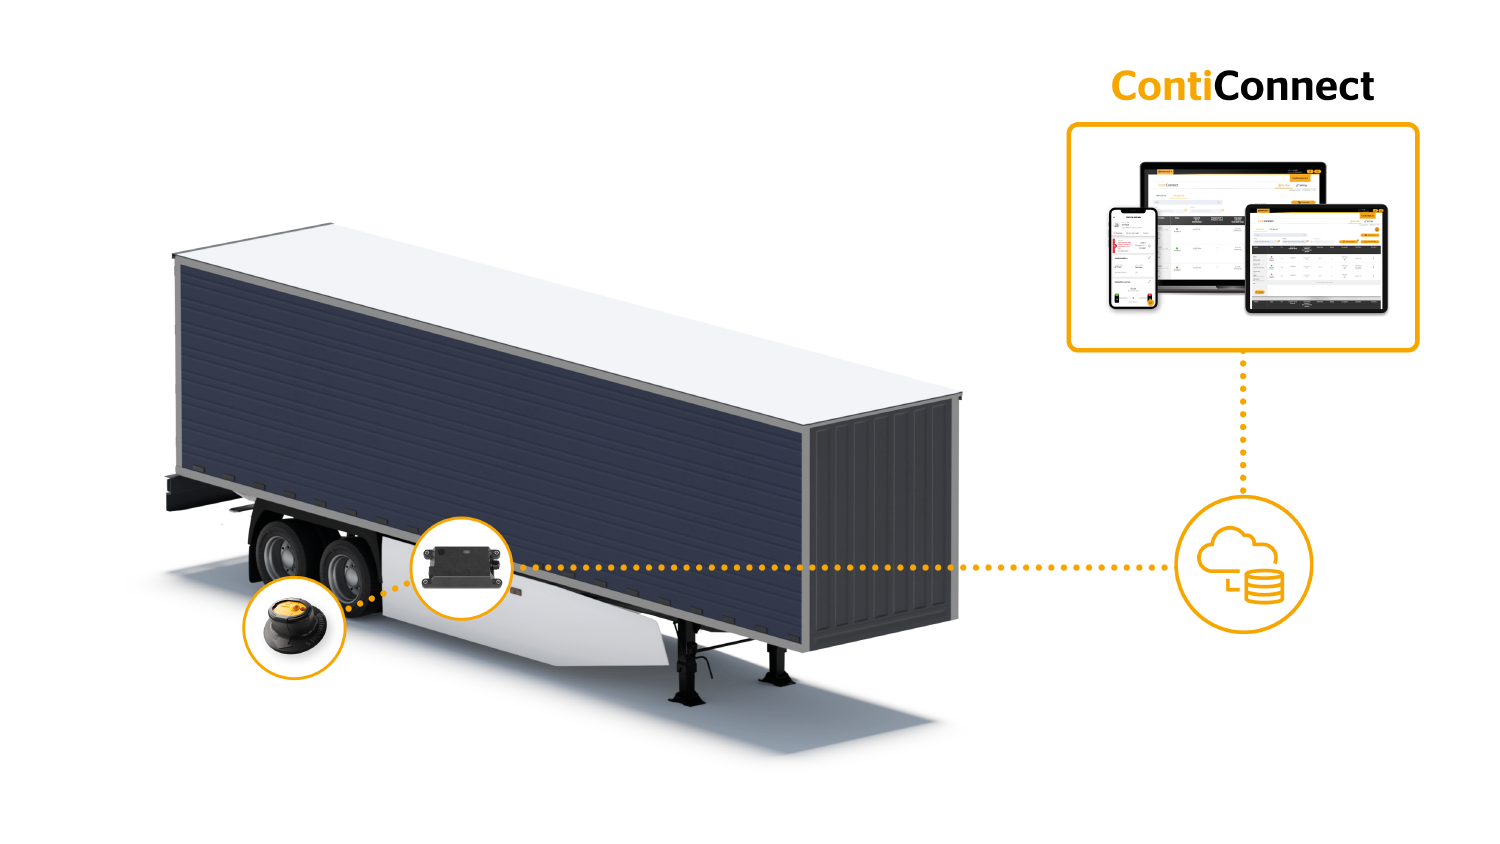 ContiConnect Live components on a trailer